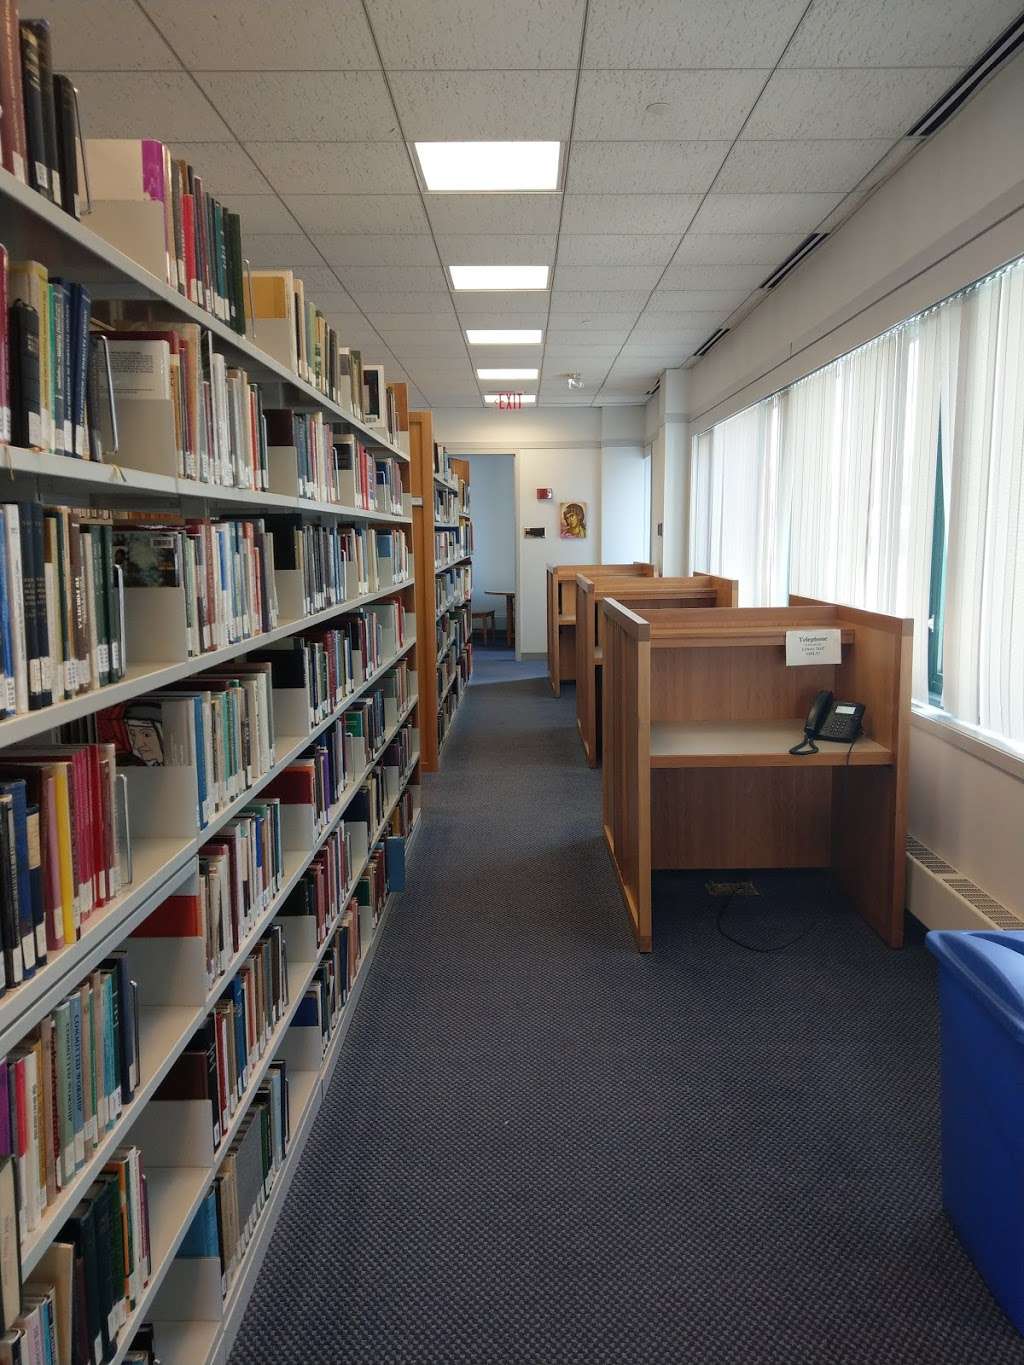 Archbishop Iakovos Library and Learning Resource Center | 50 Goddard Ave, Brookline, MA 02445 | Phone: (617) 731-3500